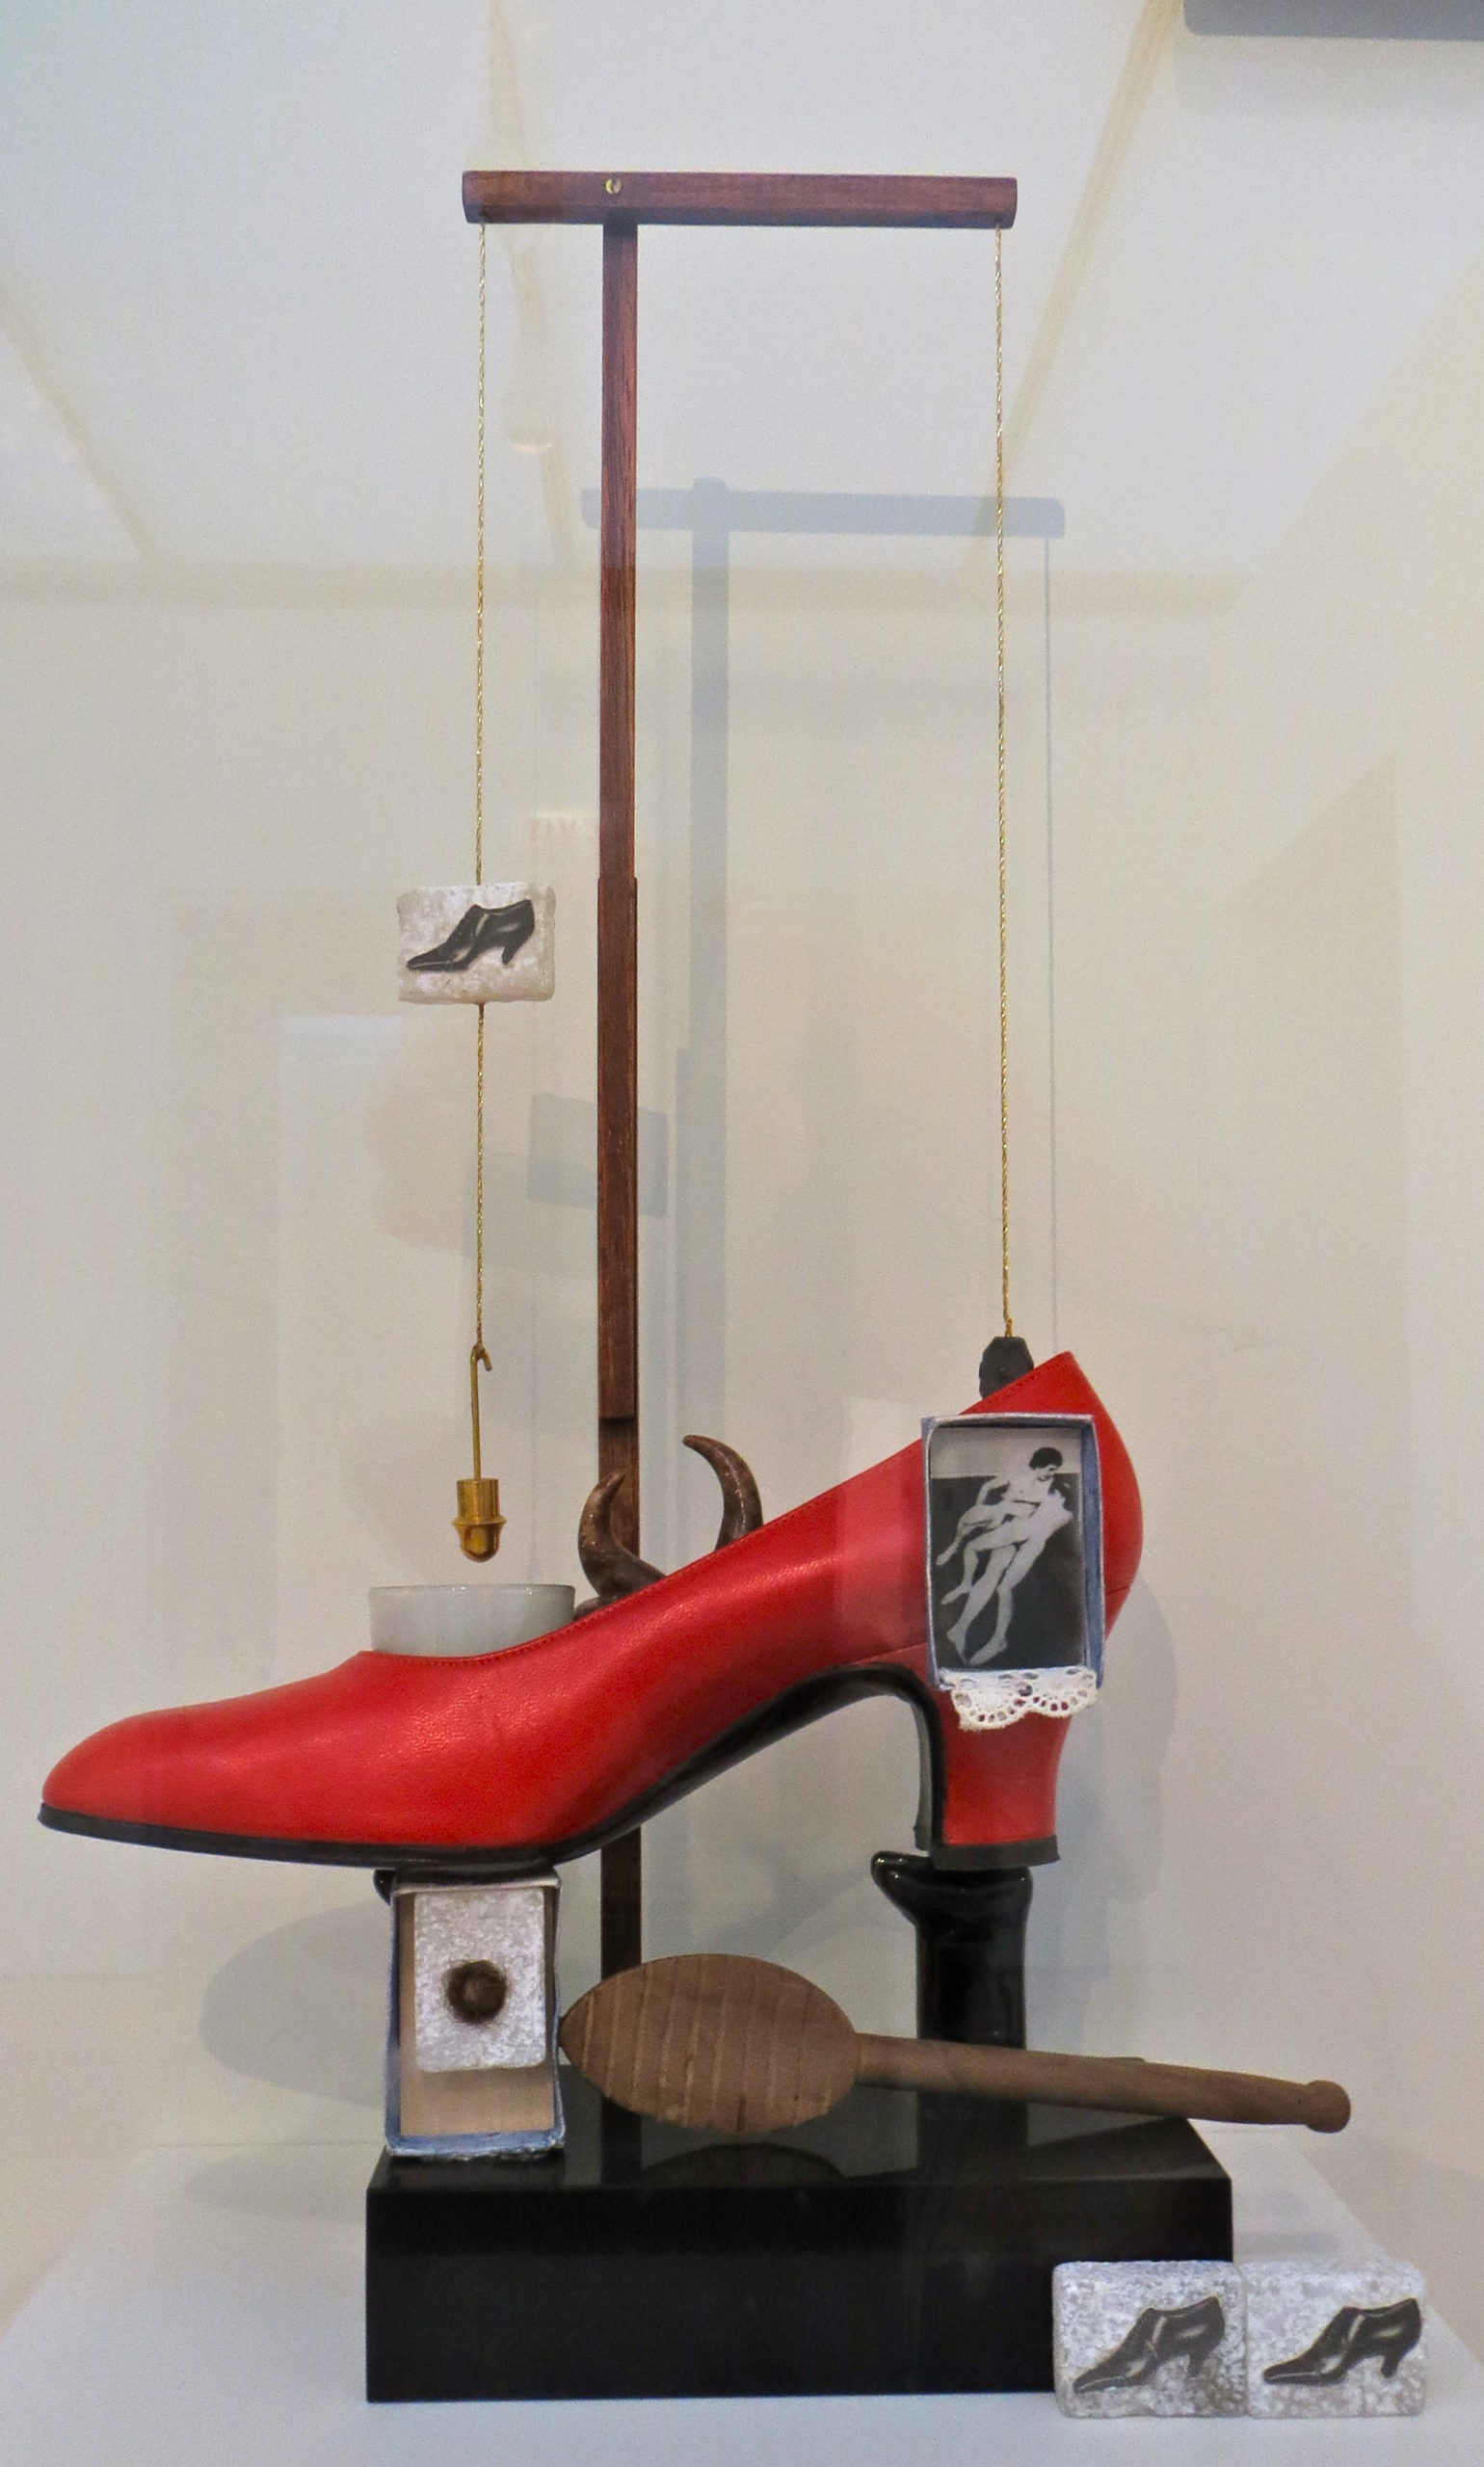 Salvador Dalí, Surrealist Object Functioning Symbolically — Gala’s Shoe, 1931 (1973 edition), Assemblage with shoe, marble, photographs, glass, was, hair, scraper, and gibbet. 48.3 x 27.9 x 9.4 cm (The Dalí Museum, St. Petersburg, FL; photo: ellenm1, CC BY-NC 2.0)